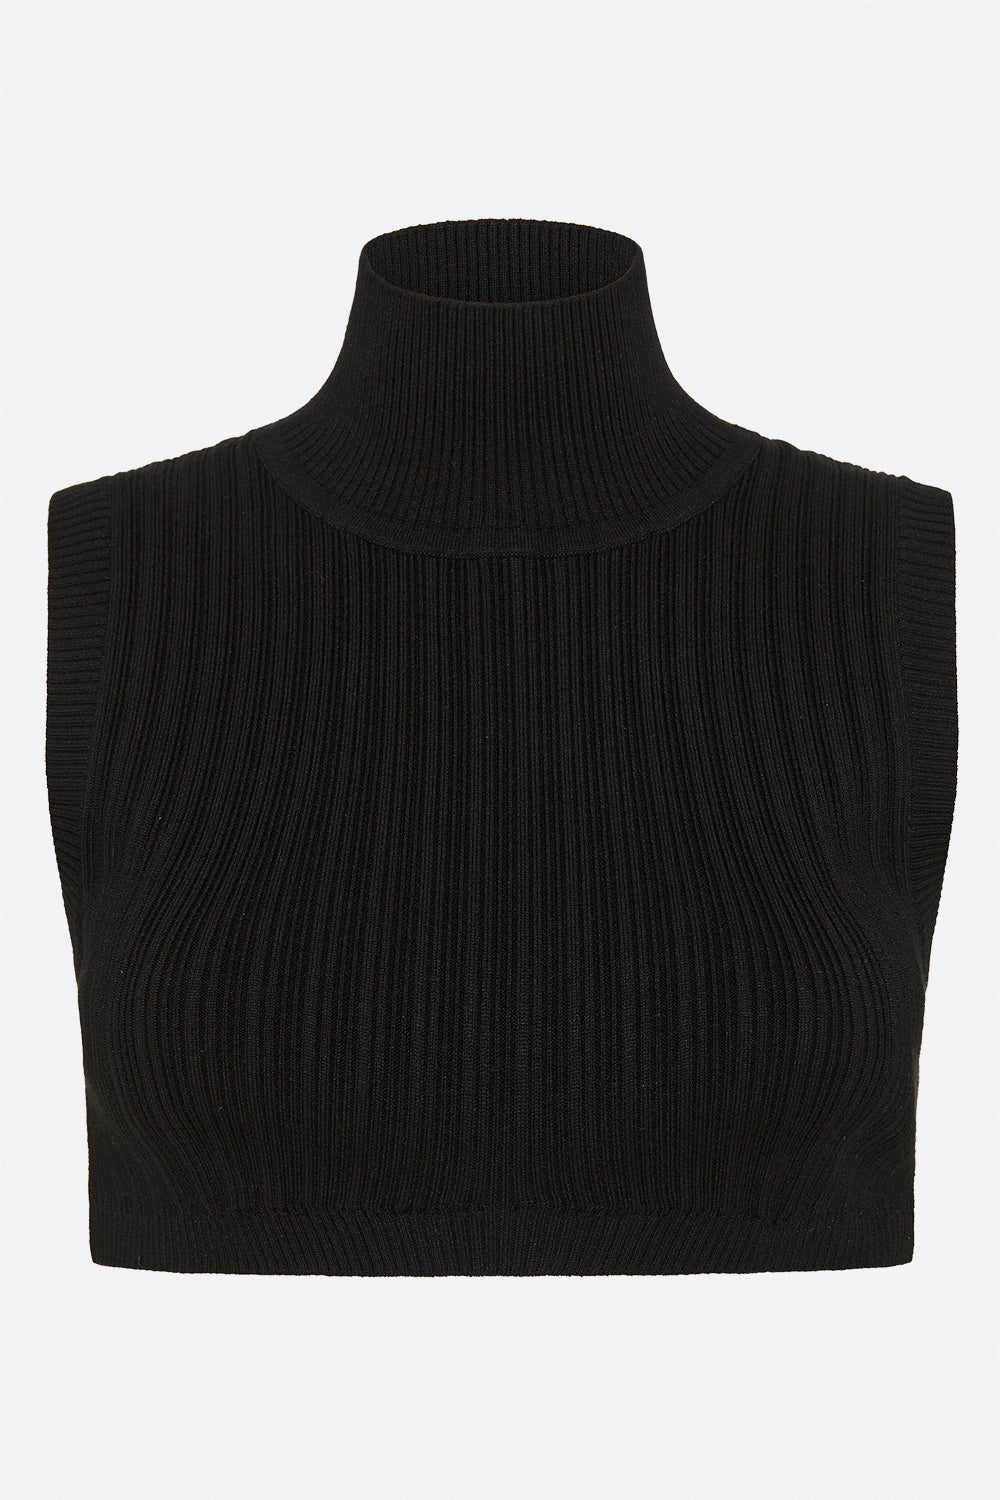 Word Is Out Crop Knit Top - Black